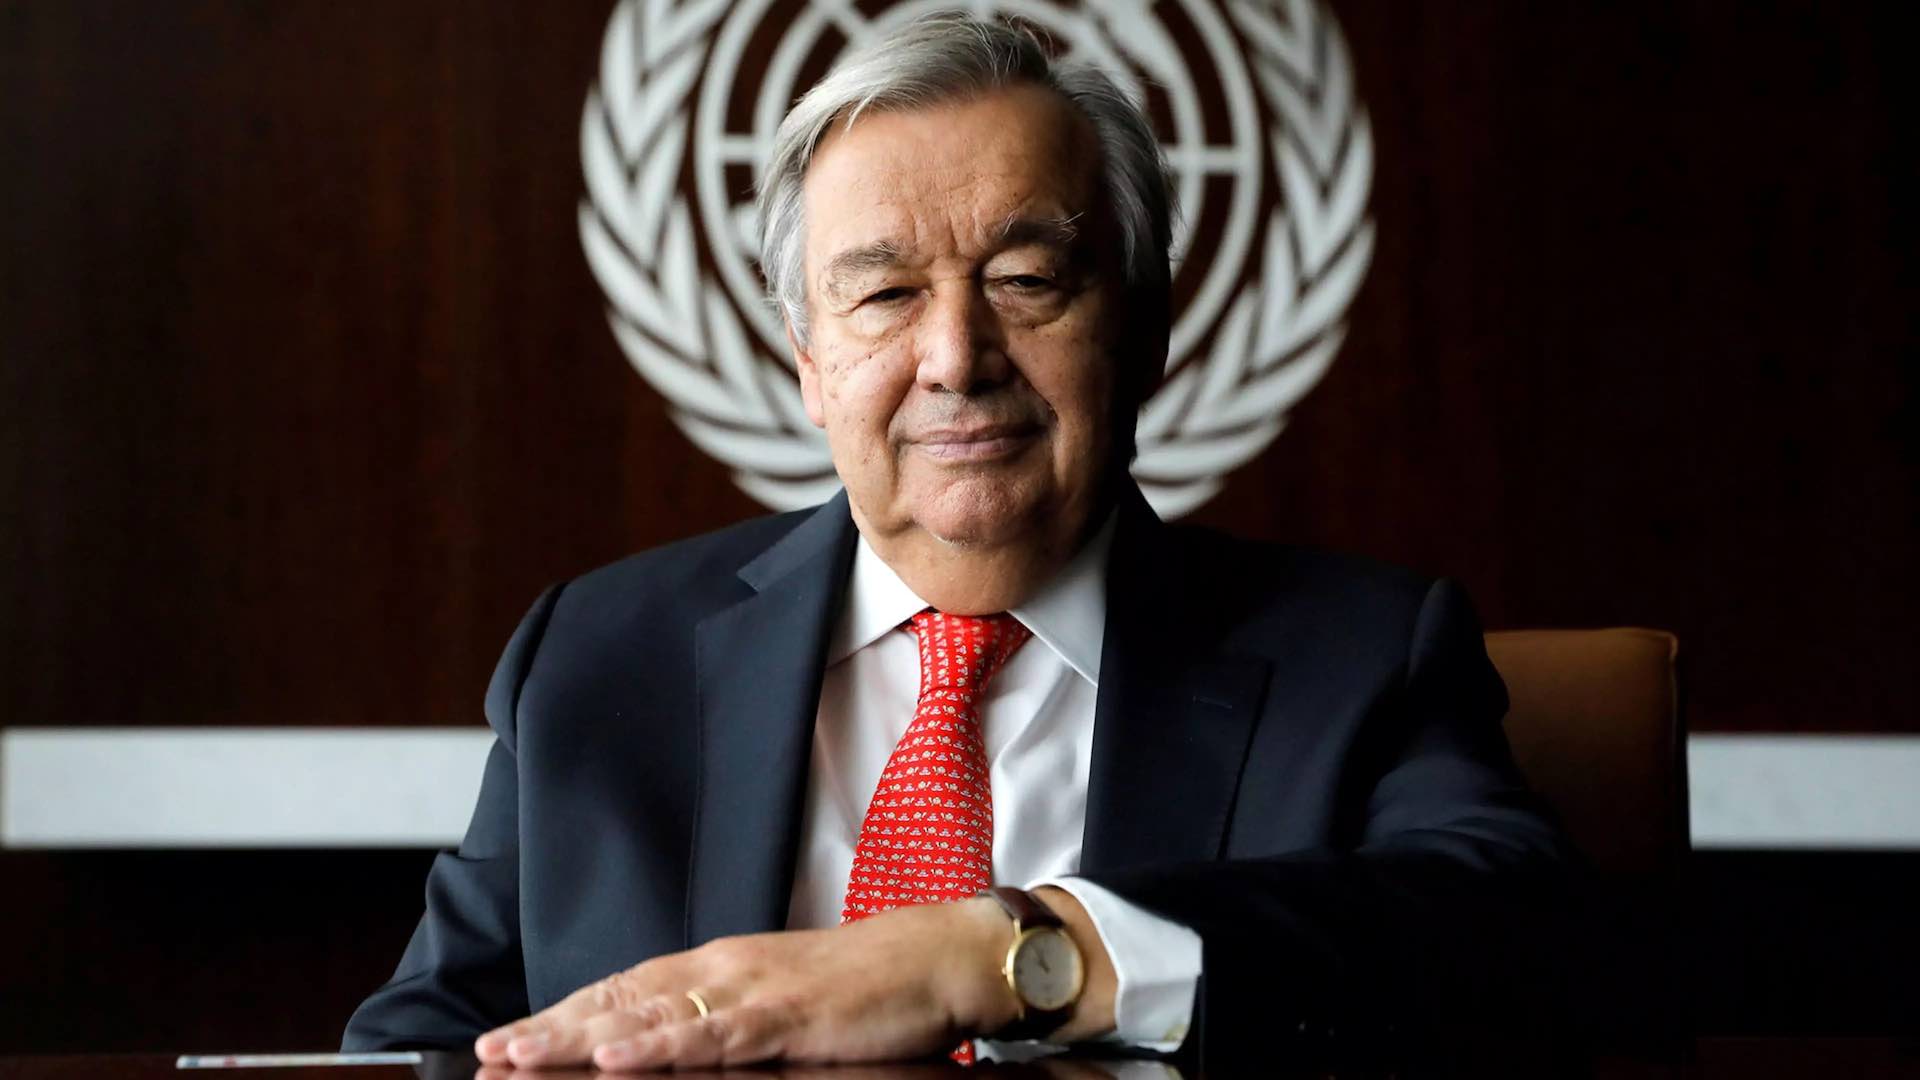 UN Secretary-General calls for financial system overhaul to support SDGs